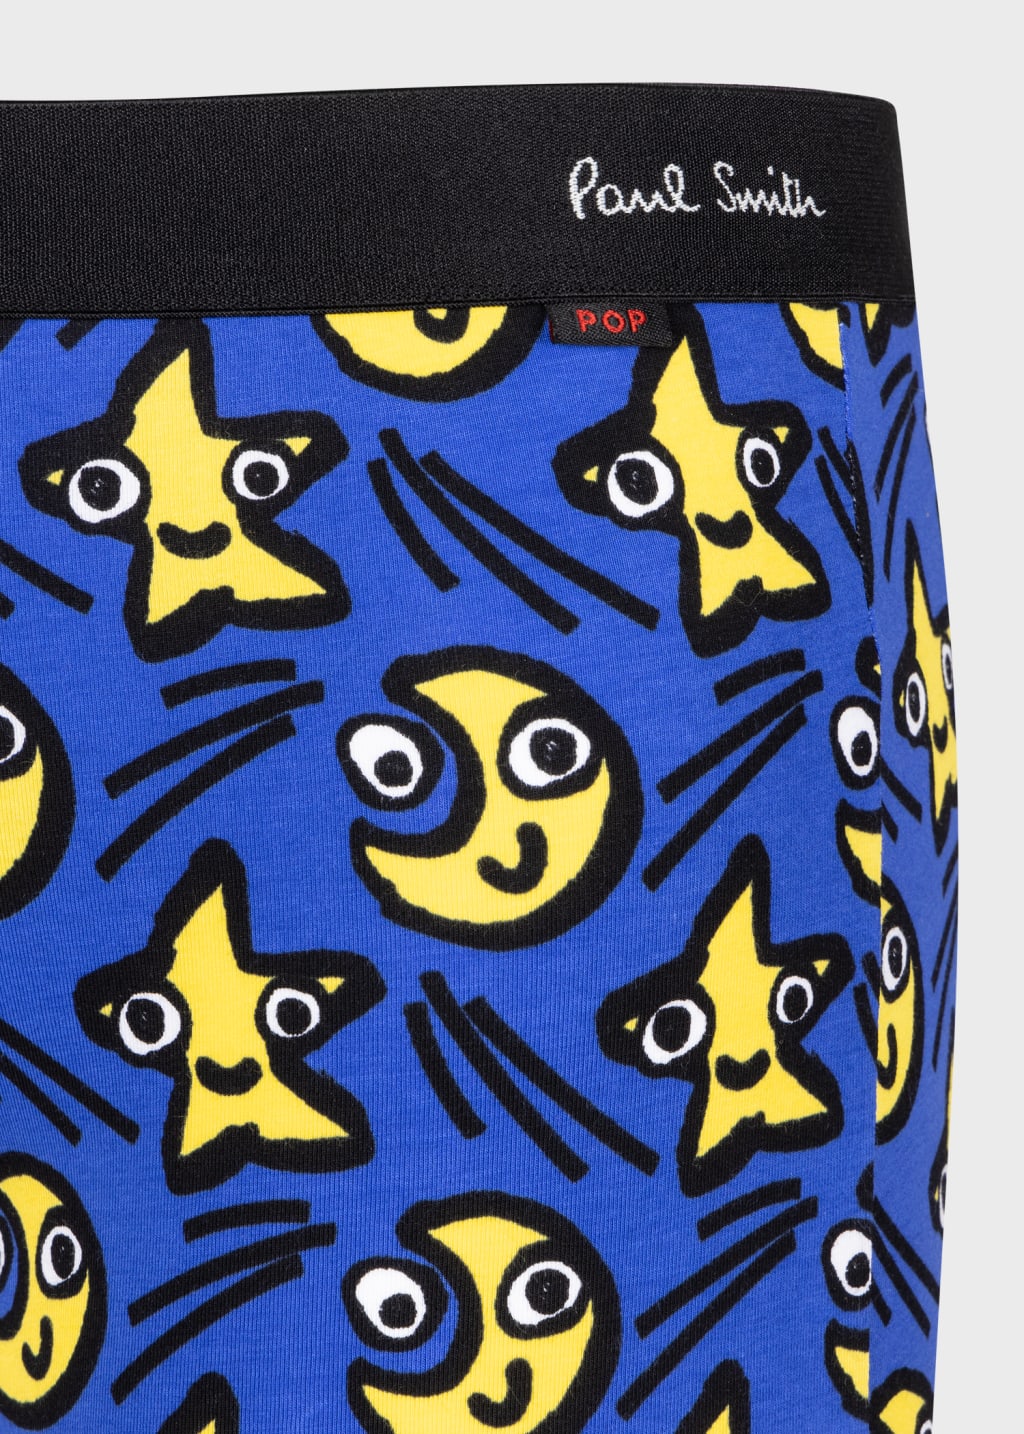 Detail View - Blue 'Star And Moon' Print Trunks Paul Smith